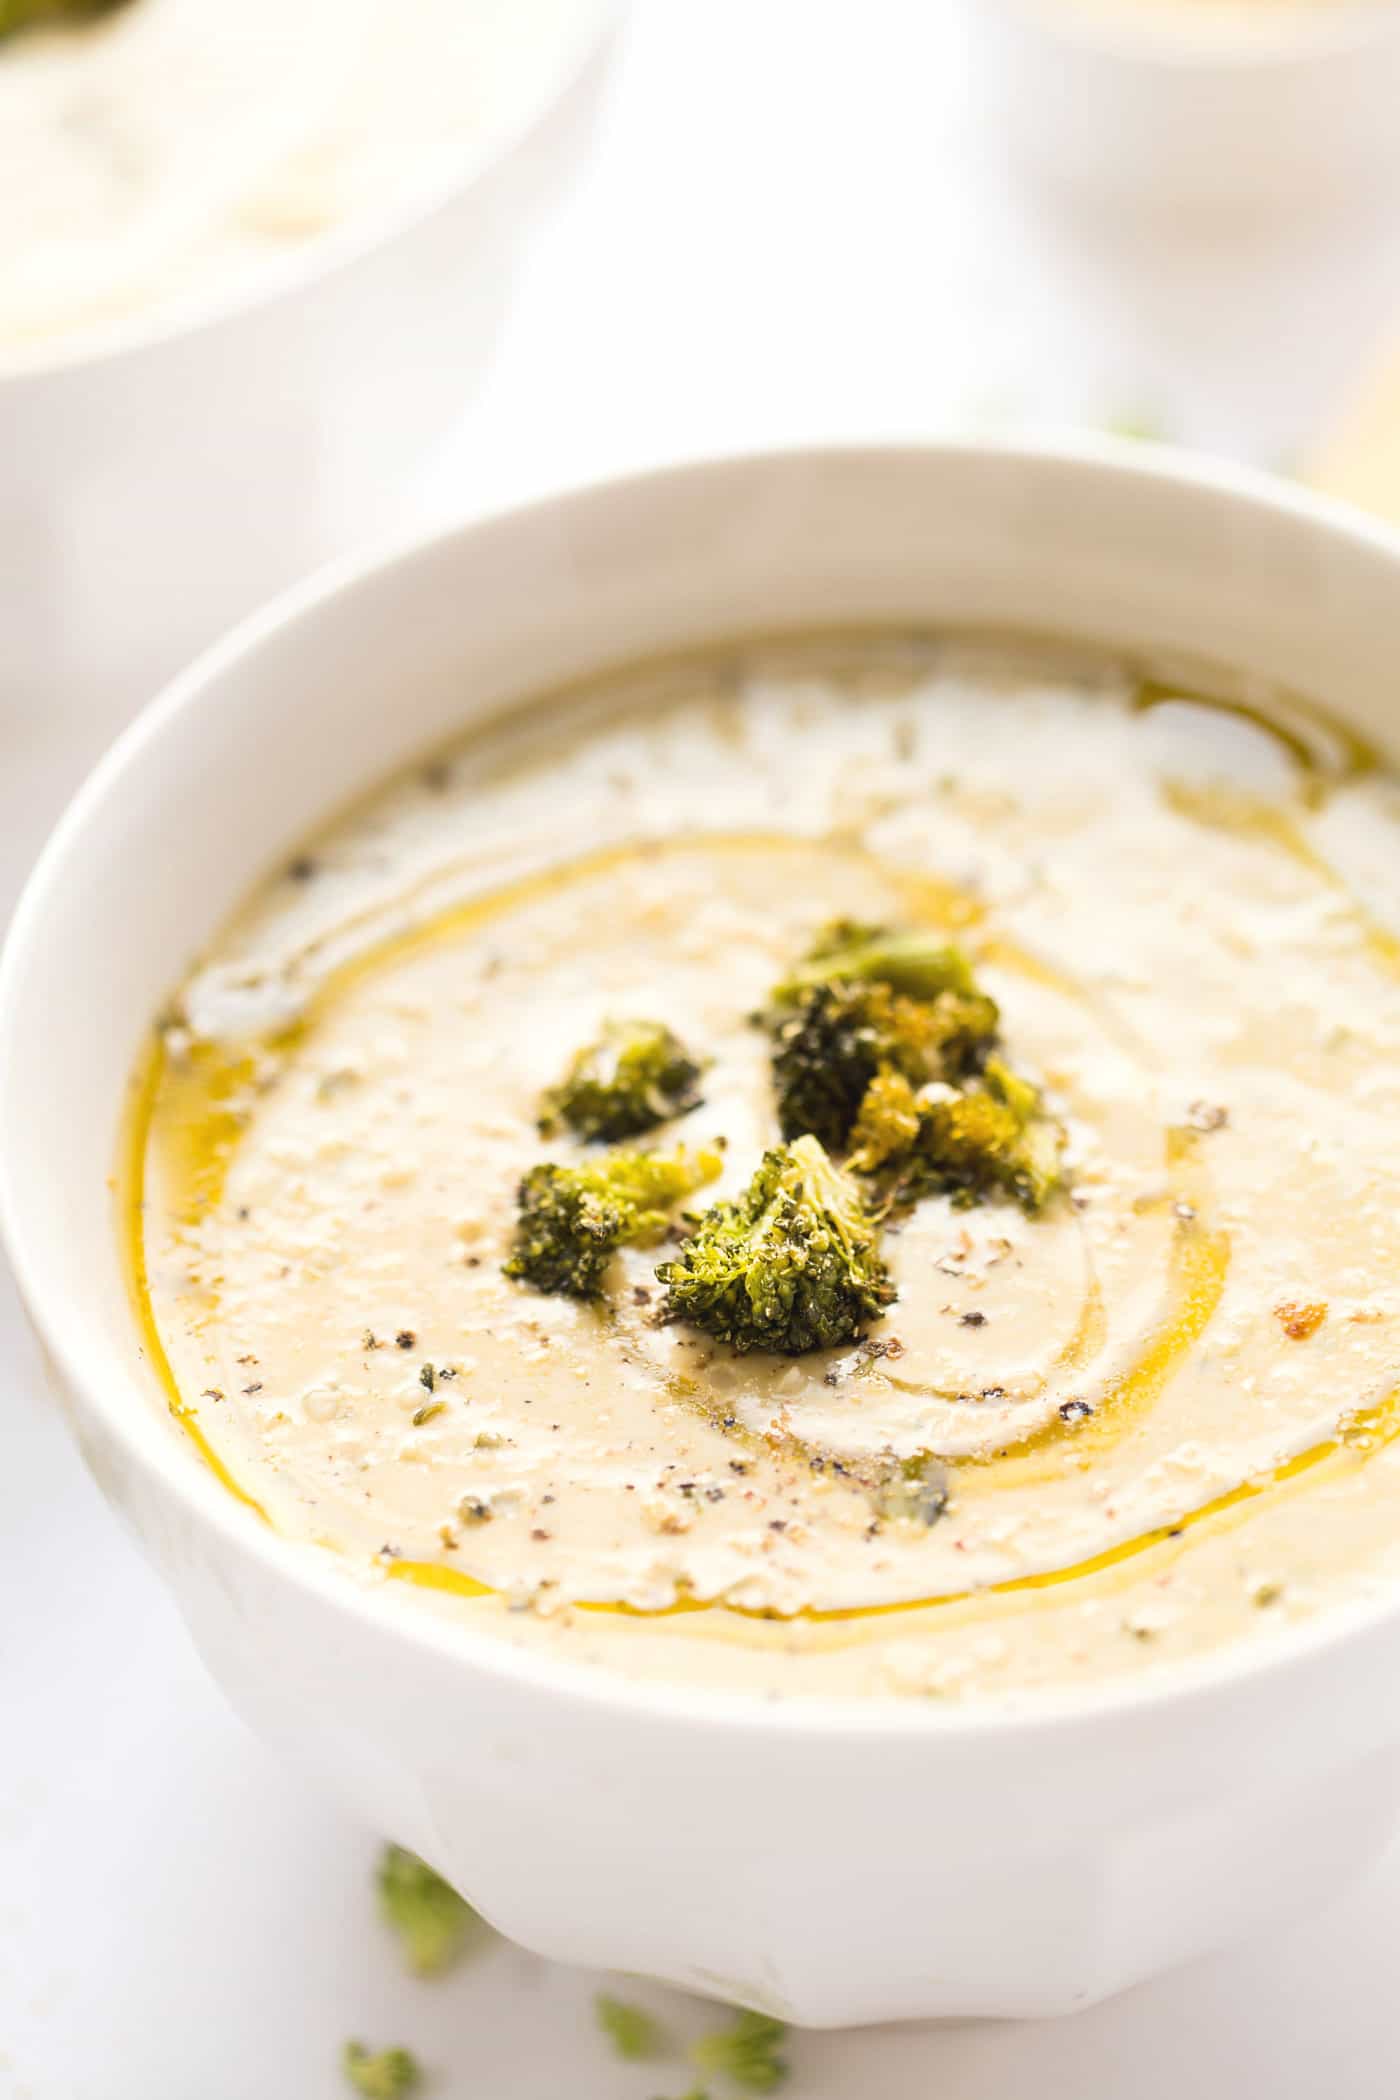 This is the BEST DAMN broccoli chowder on the planet! Packed with flavor, super thick and creamy and made WITHOUT any dairy!